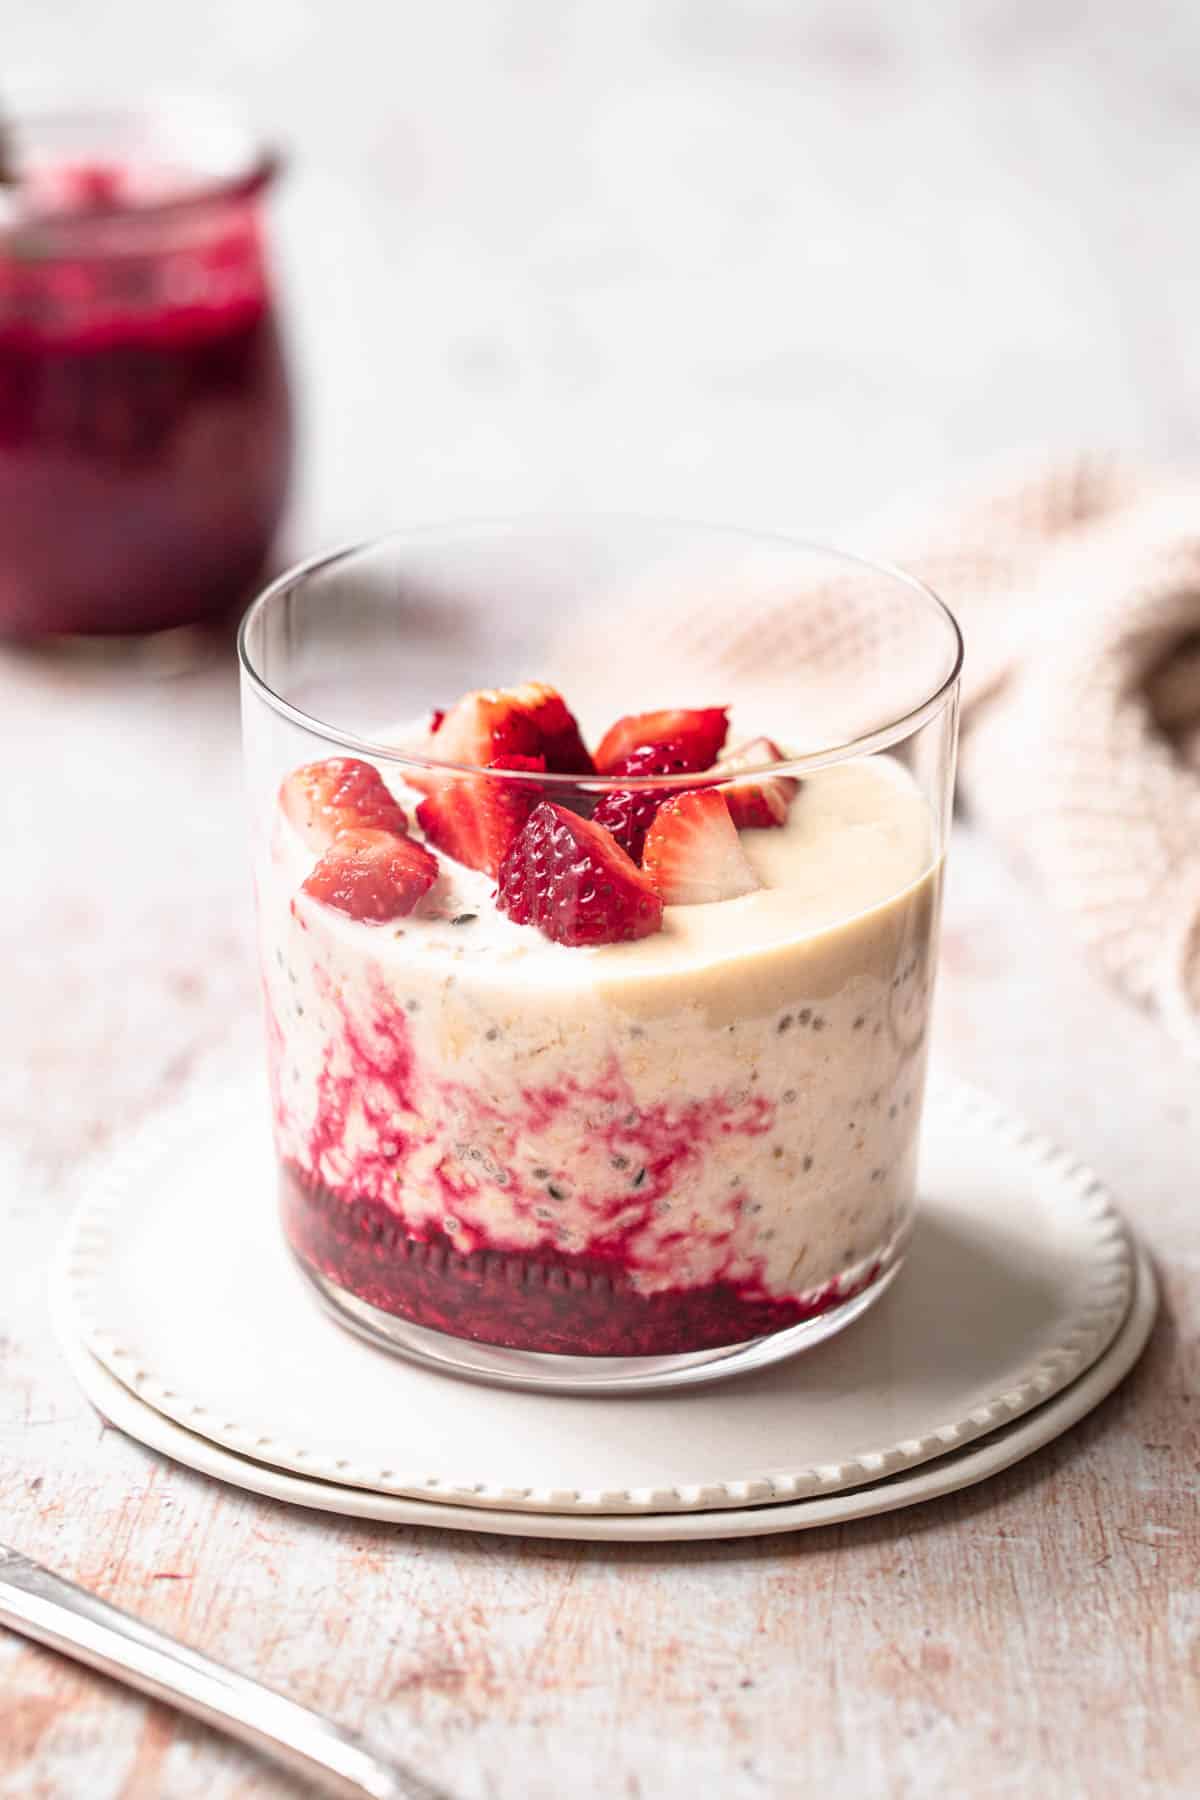 Overnight oats made without milk, in a glass tumbler, layered with raspberry compote and topped with tahini.